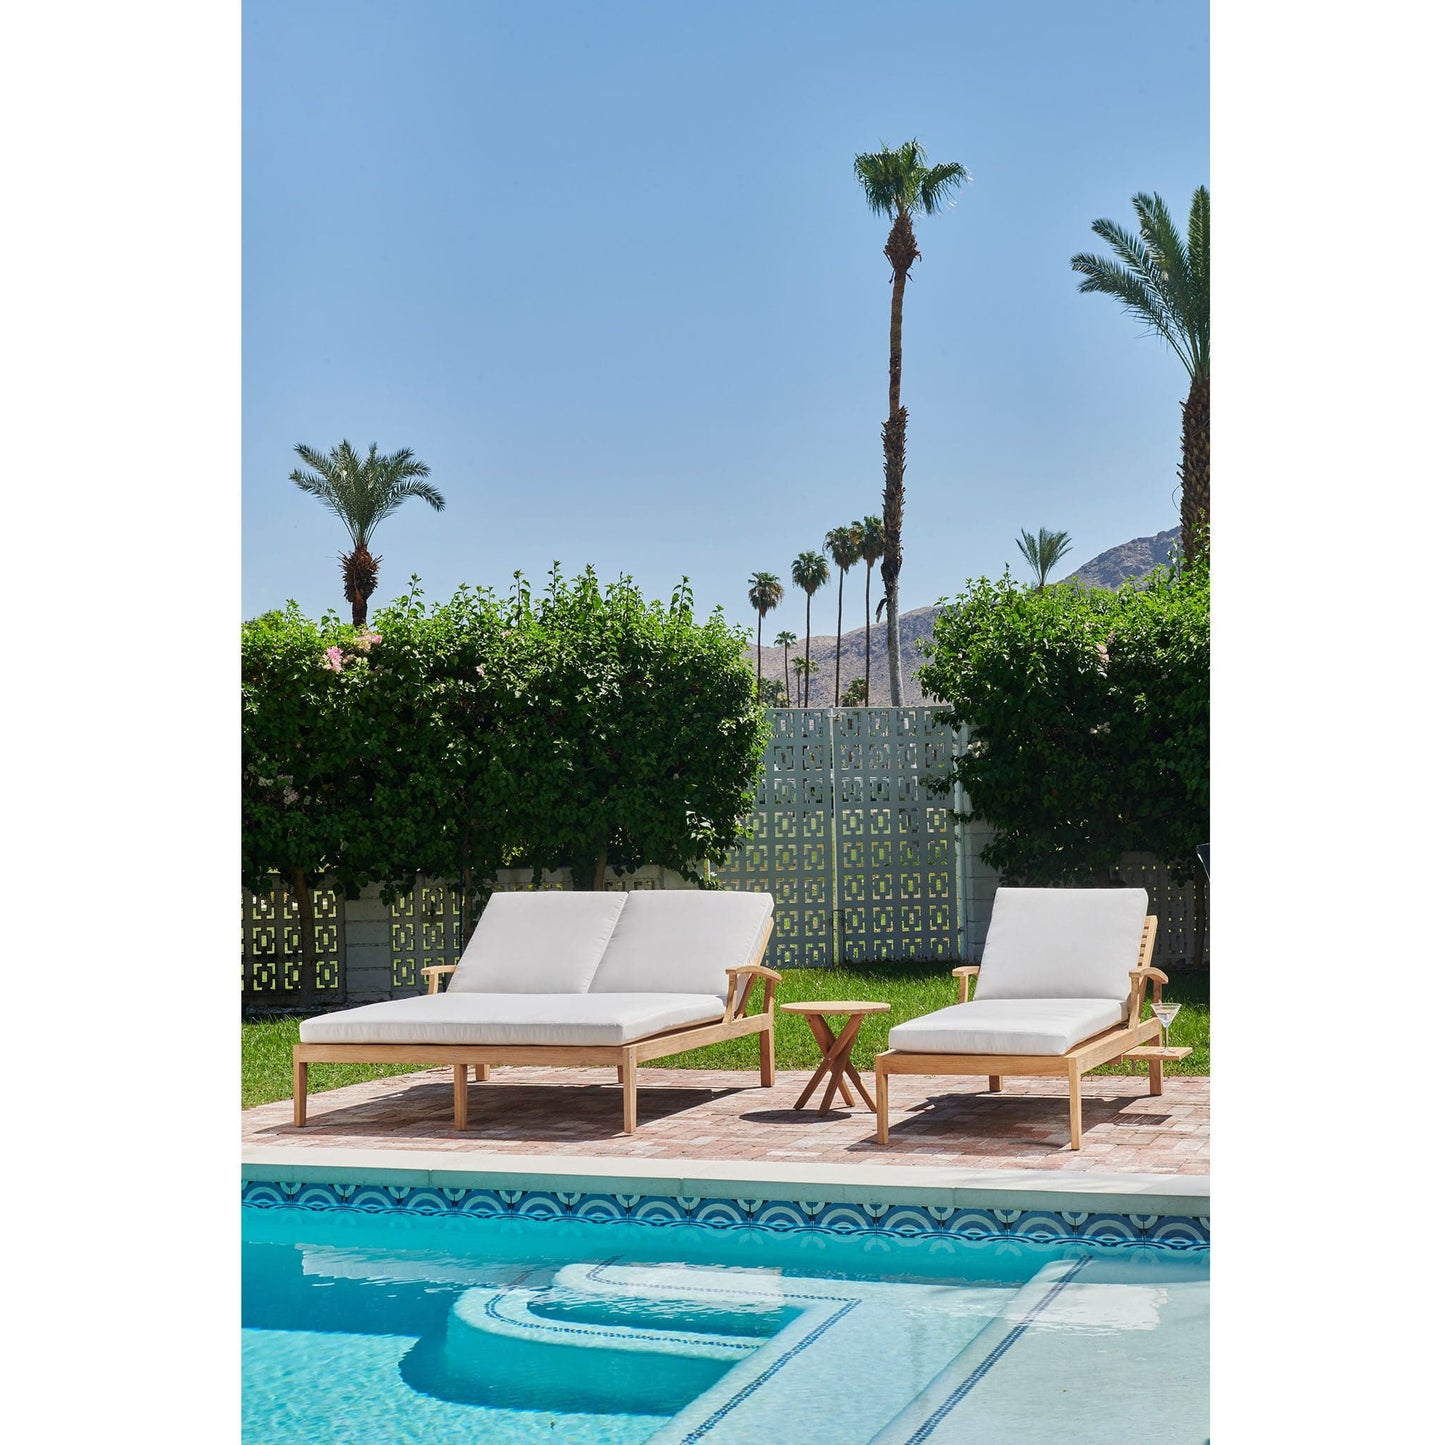 Delano Double Sunlounger With Cushion